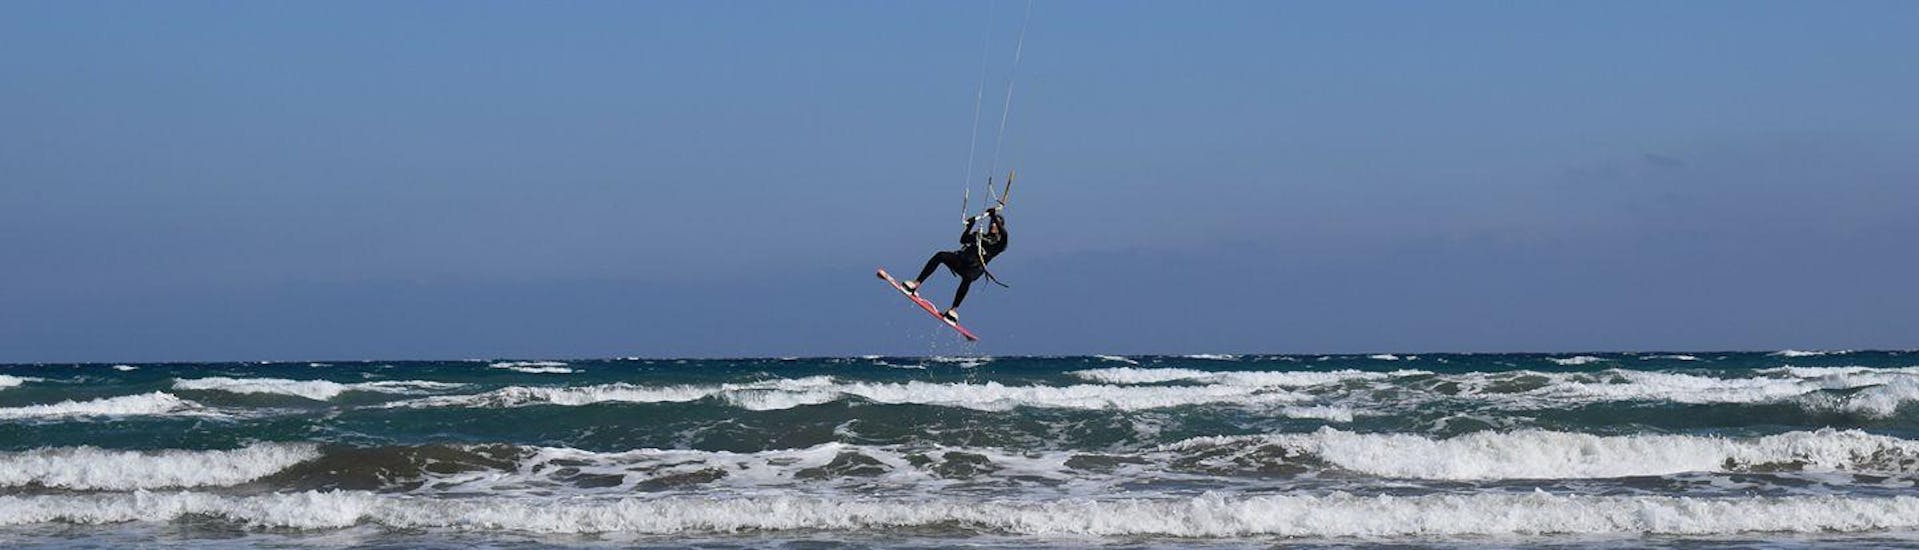 Kitesurfing Lessons for Kids and Adults - All Levels.